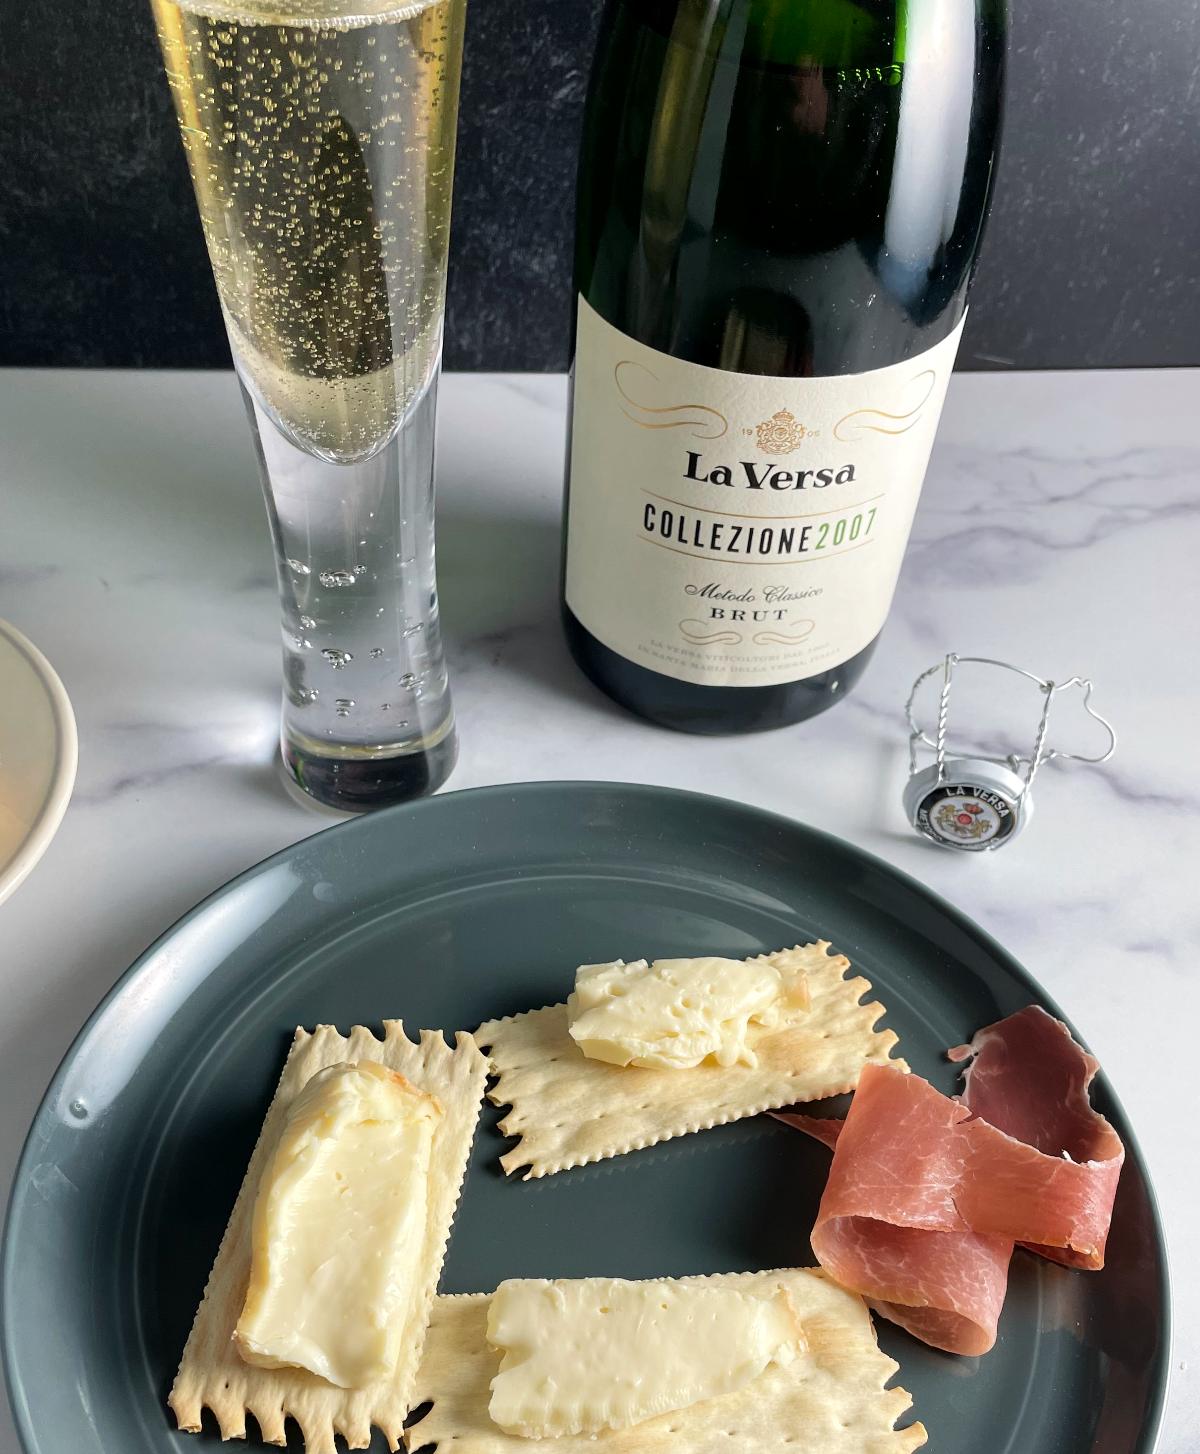 plate with taleggio cheese spread over crackers, along with some prosciutto. Pairing with sparkling wine from Oltrepo Pavese.